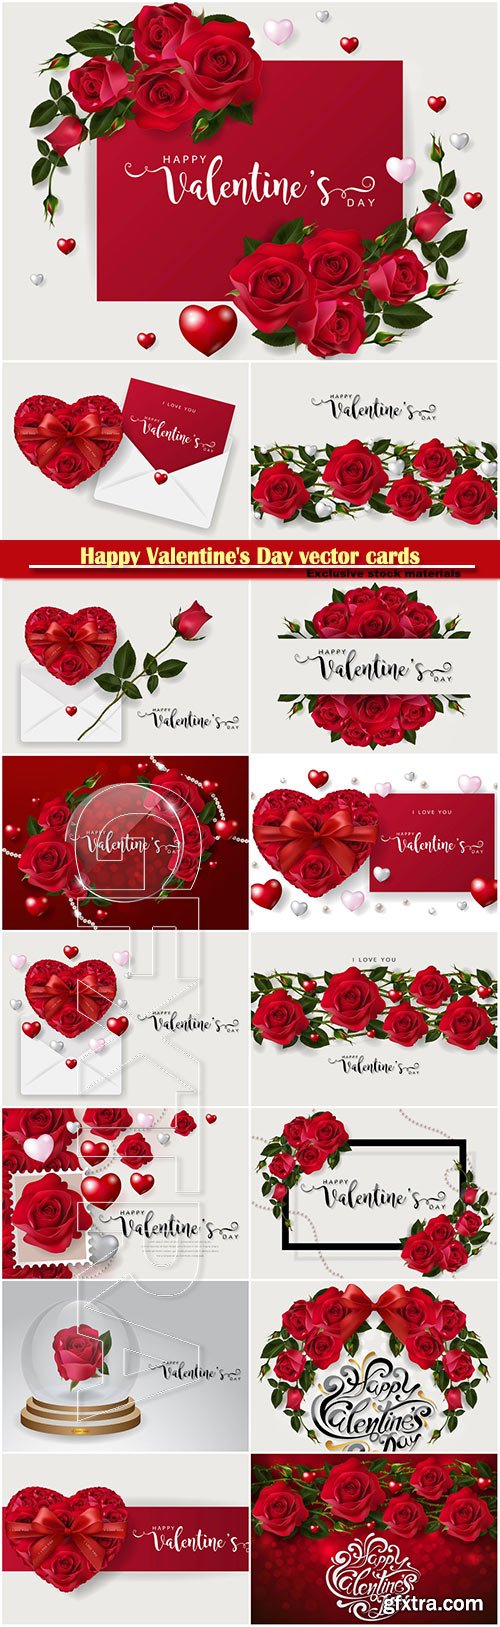 Happy Valentine\'s Day vector cards, red roses and hearts, romantic backgrounds # 2